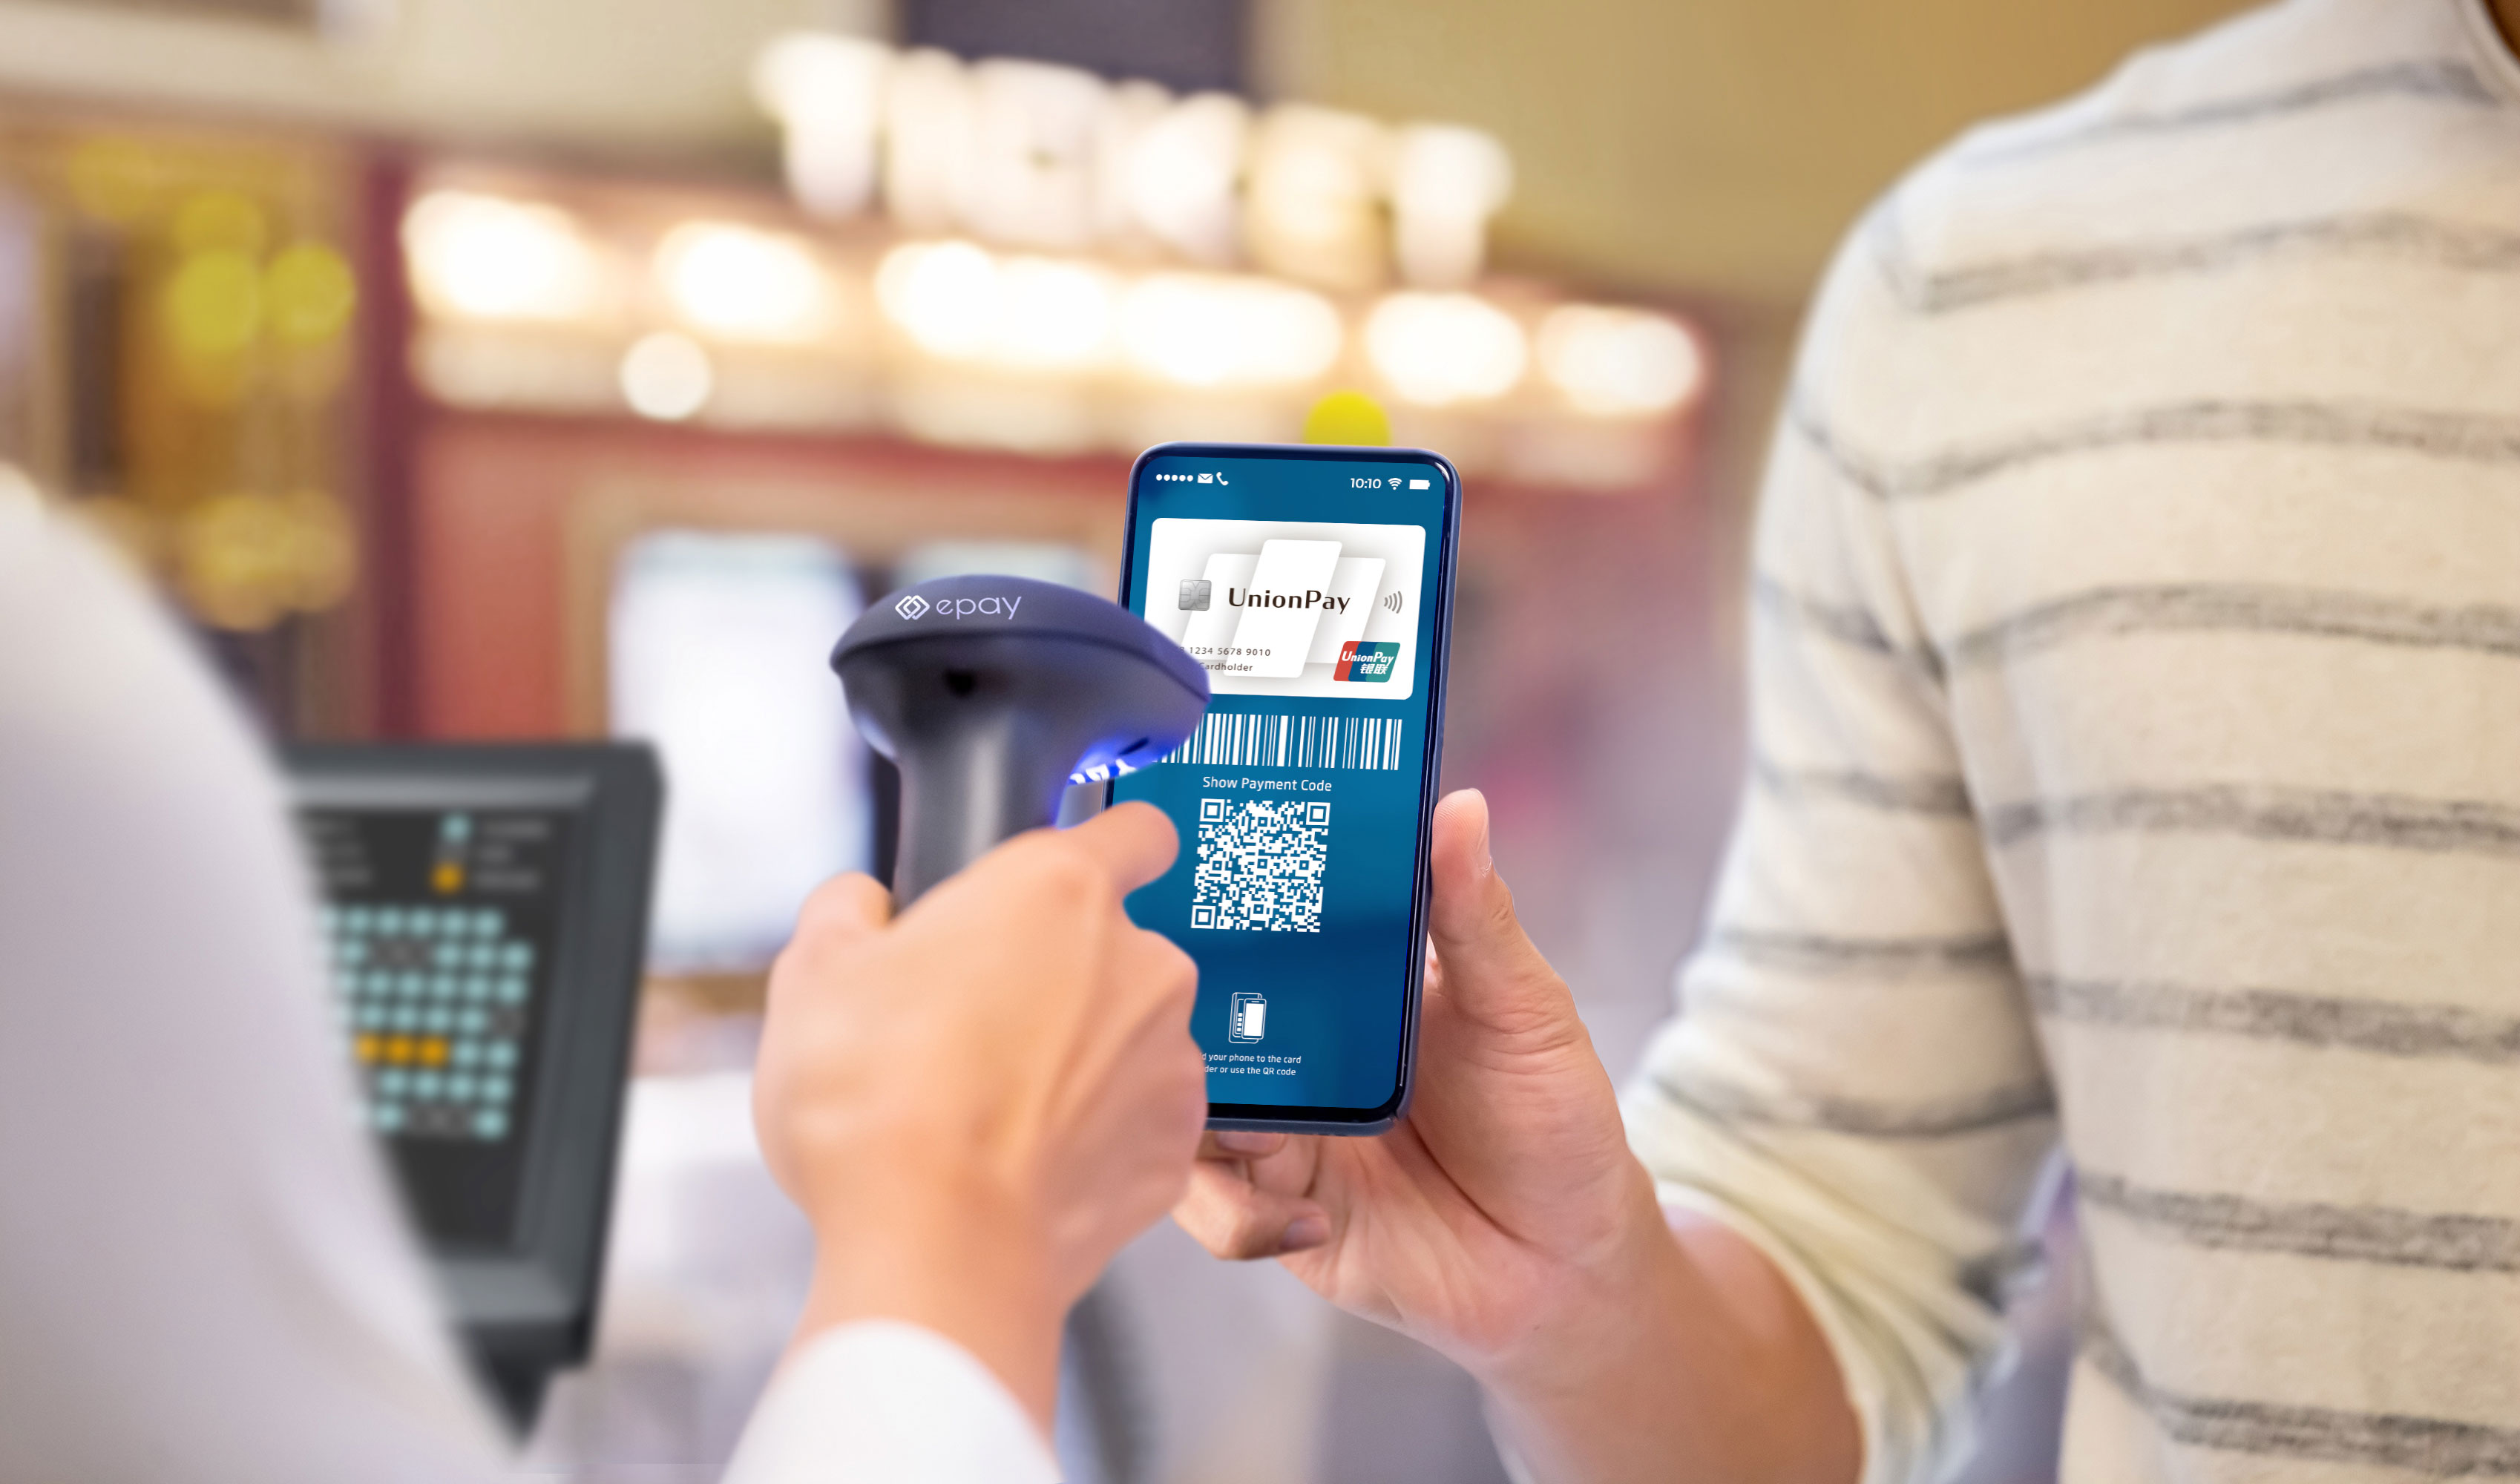 epay is first to integrate UnionPay QR code payments in Europe thumbnail